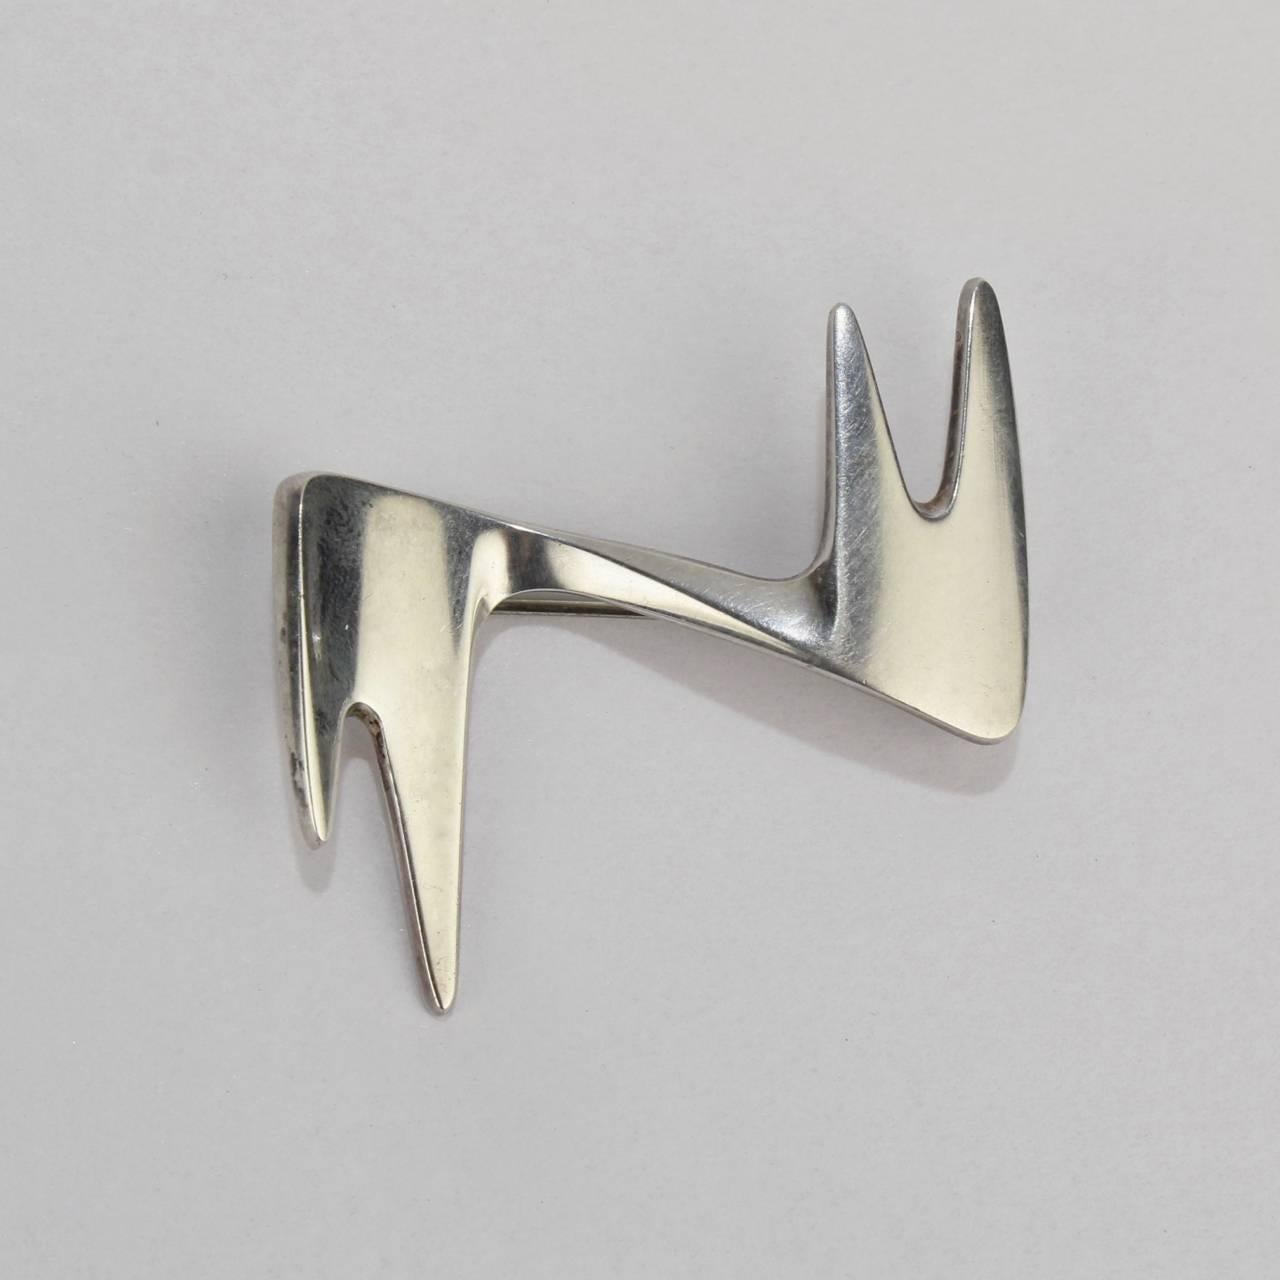 A fine Georg Jensen modernist sterling silver brooch.

Designed by Ibe Dahlqvist in the 1960s.

#361

Length: ca. 1 1/2 in.

Items purchased from David Sterner Antiques must delight you. Purchases may be returned for any reason for a period of 7